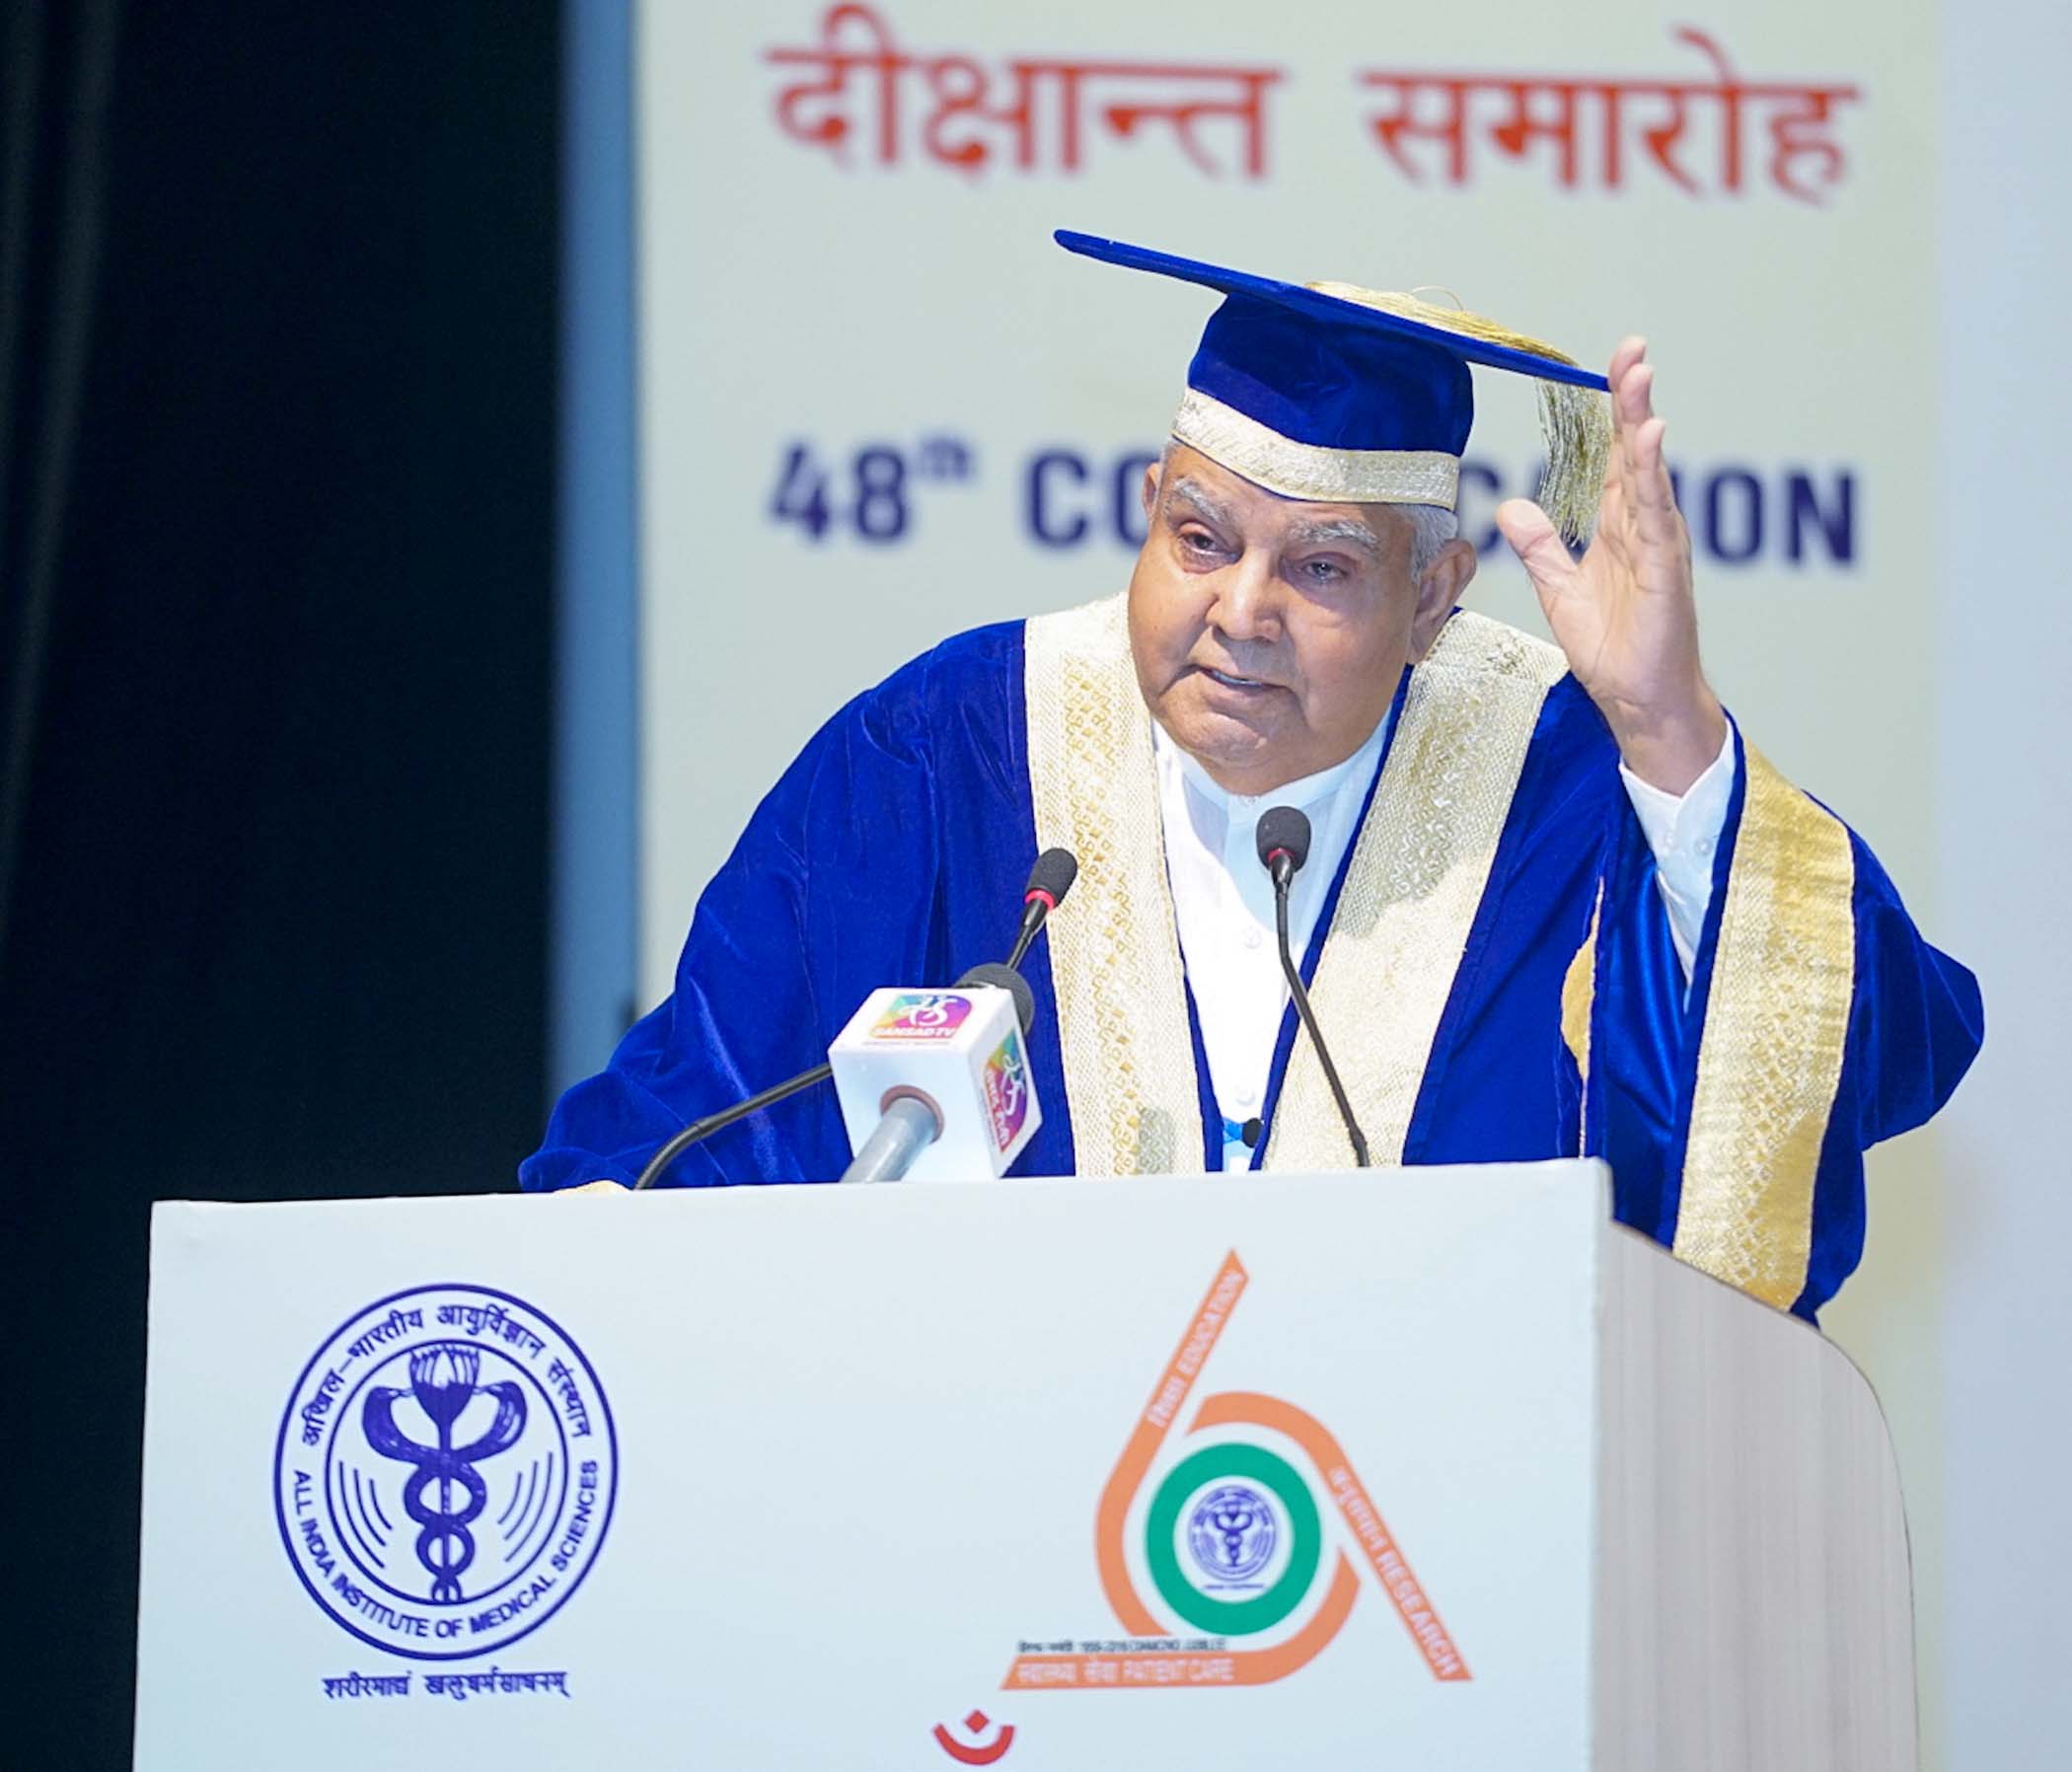 The Vice President, Shri Jagdeep Dhankhar addressed the 48th Convocation of All India Institute of Medical Sciences (AIIMS), New Delhi today.